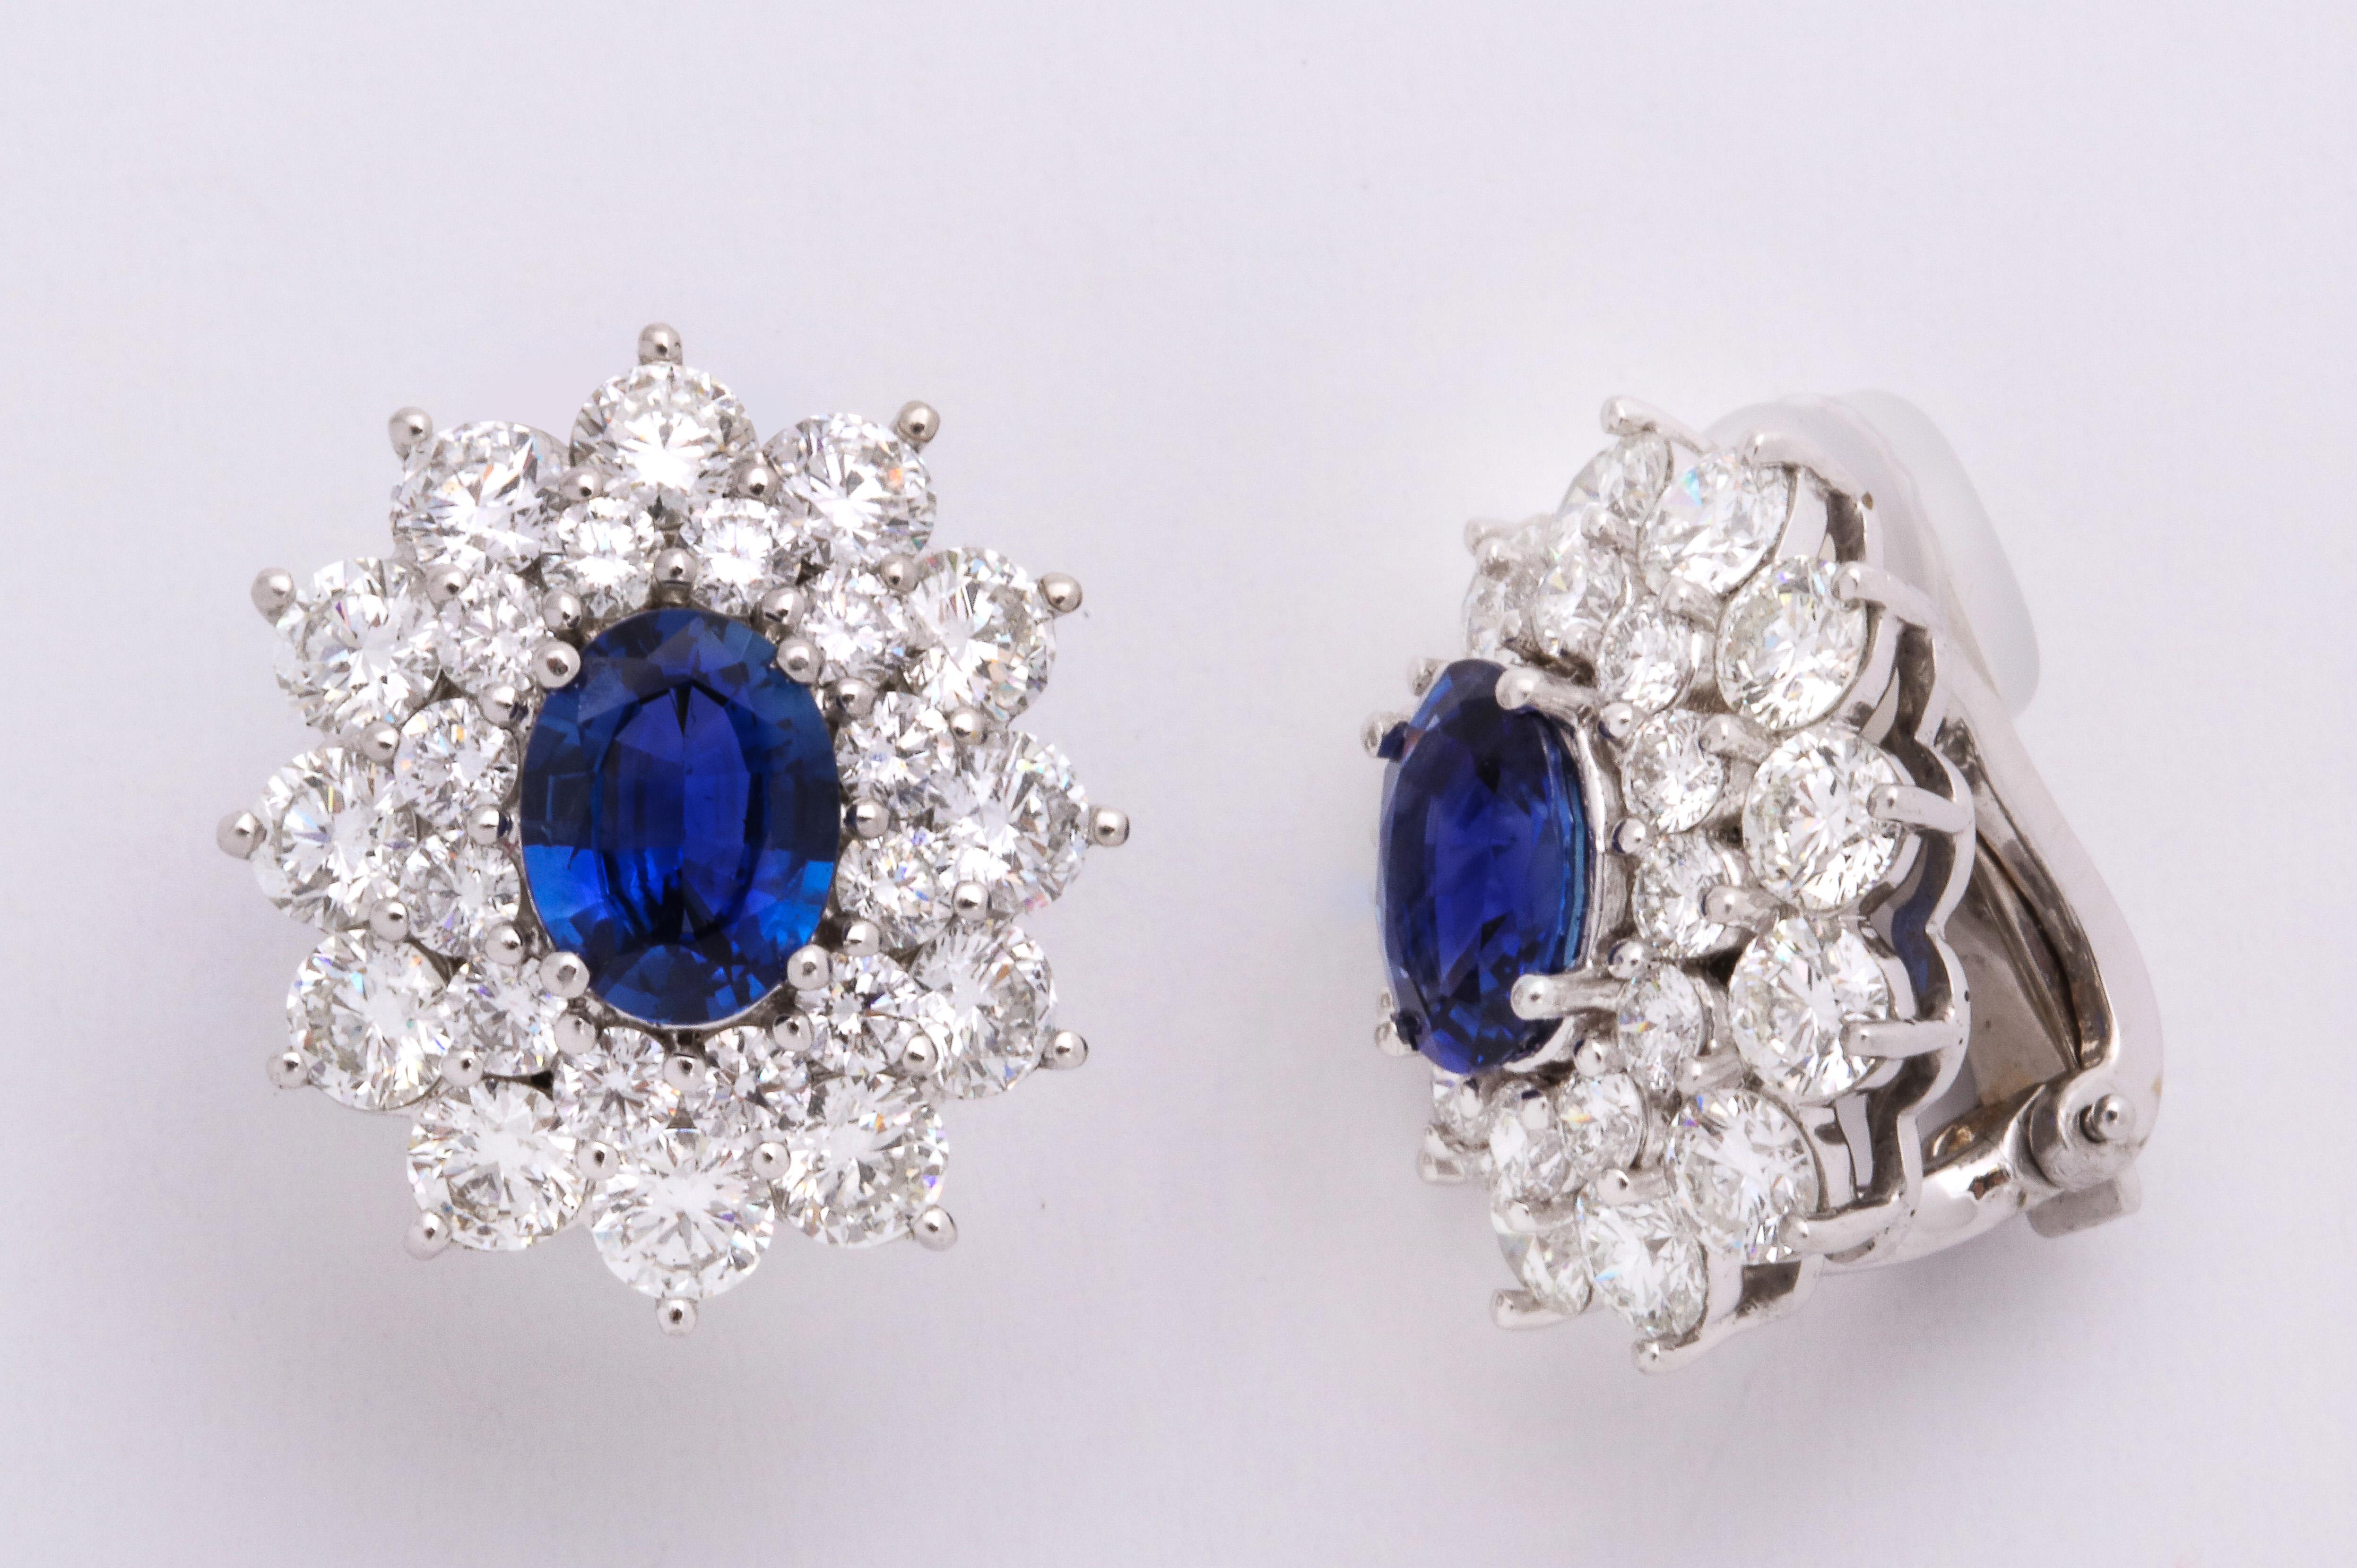 Timeless oval faceted Ceylon sapphires: 2.87 carats, mounted on platinum ear clip earrings decorated with a double row of round, brilliant-cut colorless diamonds, prong-set: 5.47 carats. Balanced and symmetrical!
These earrings are fitted with